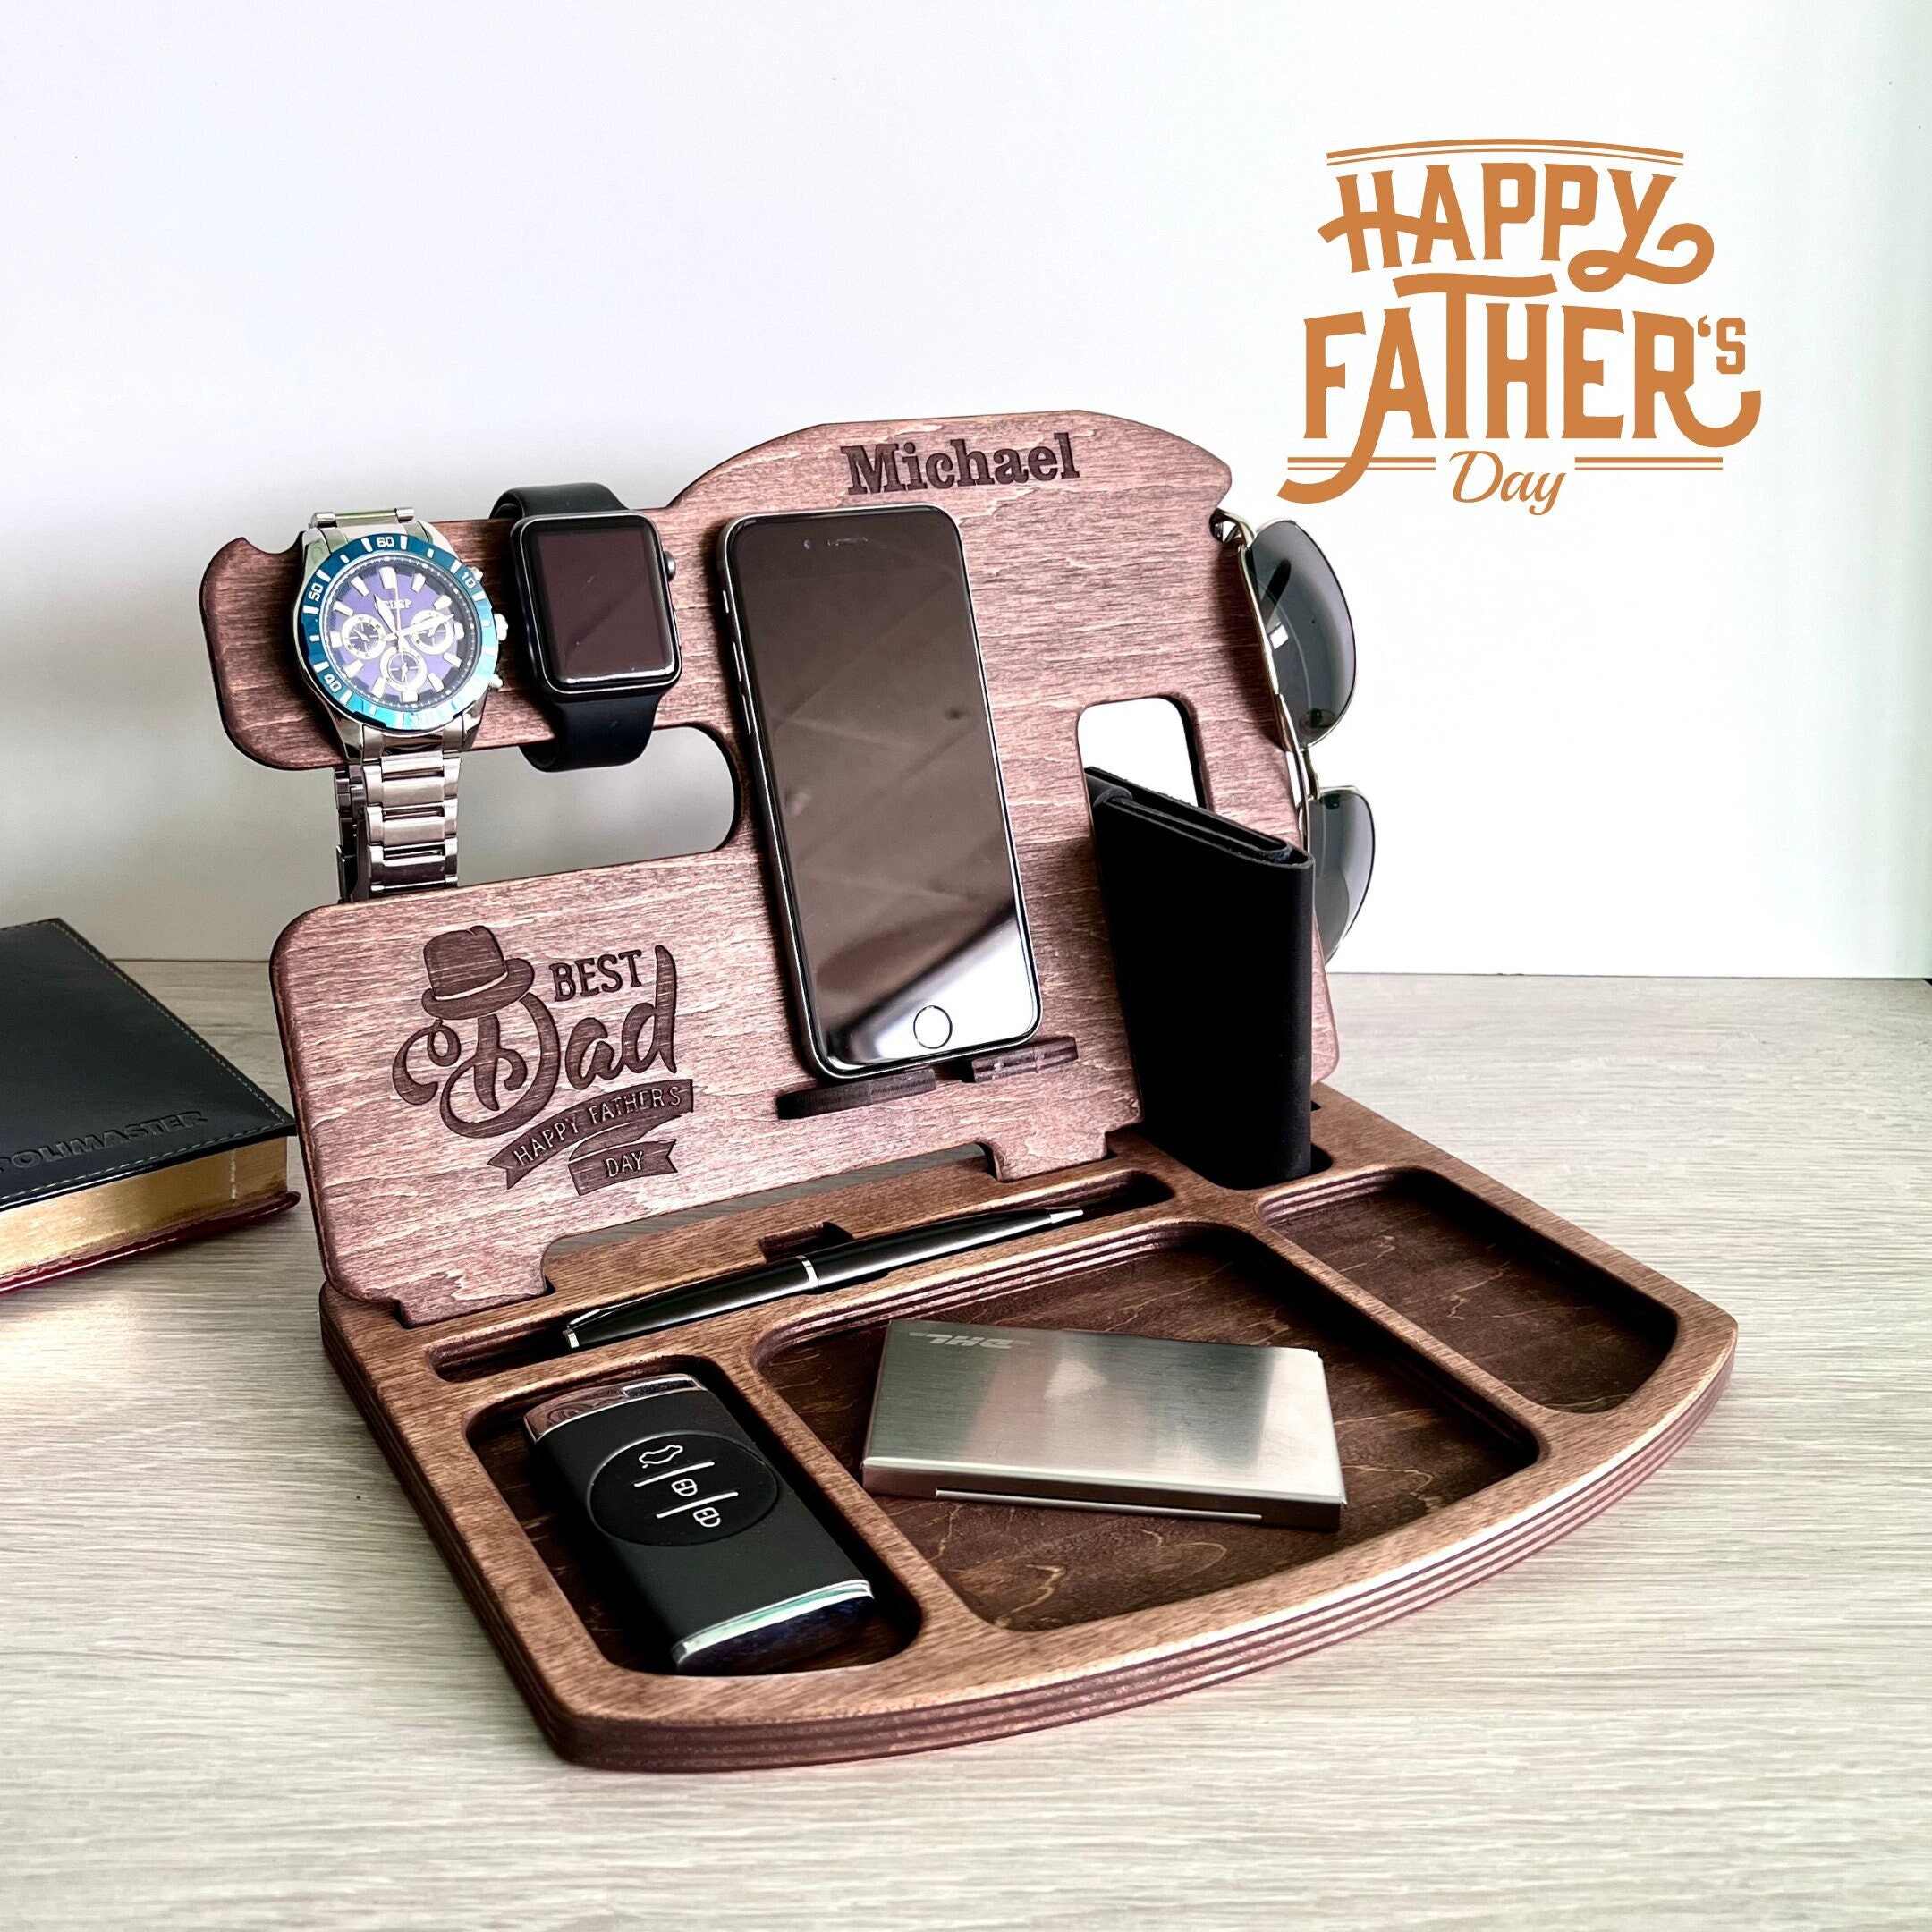 Explore more than 183 birthday gifts for dad best